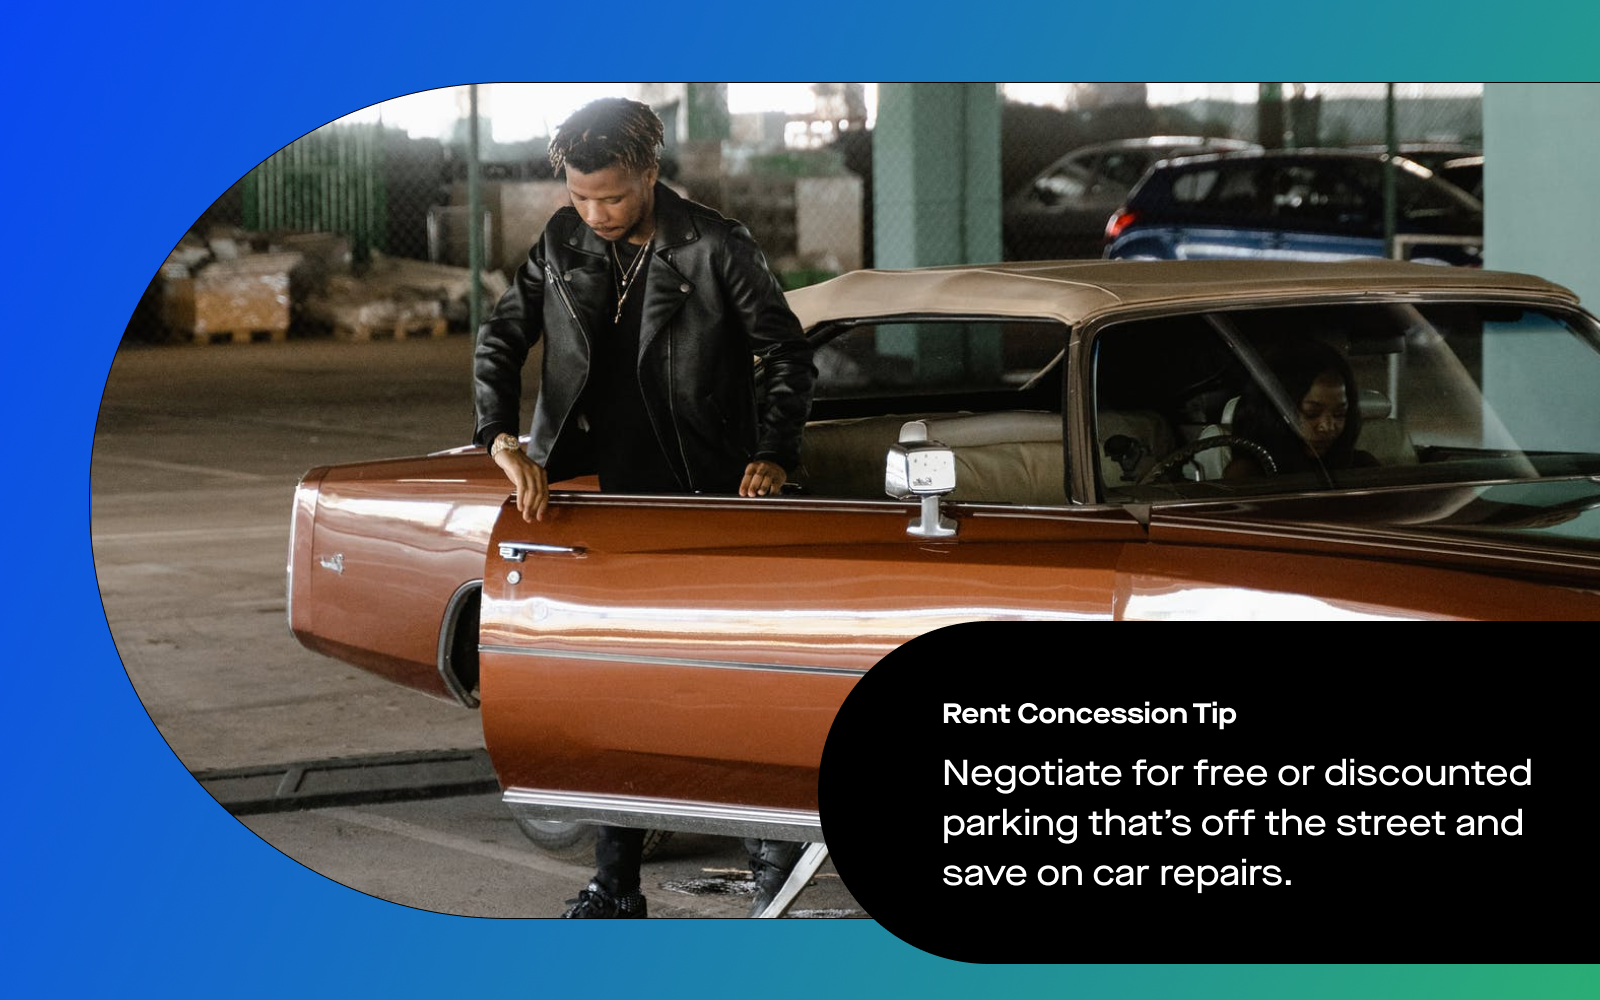 Image of a renter exiting their car, with the text "Rent concession tip - Negotiate for free or discounted parking that